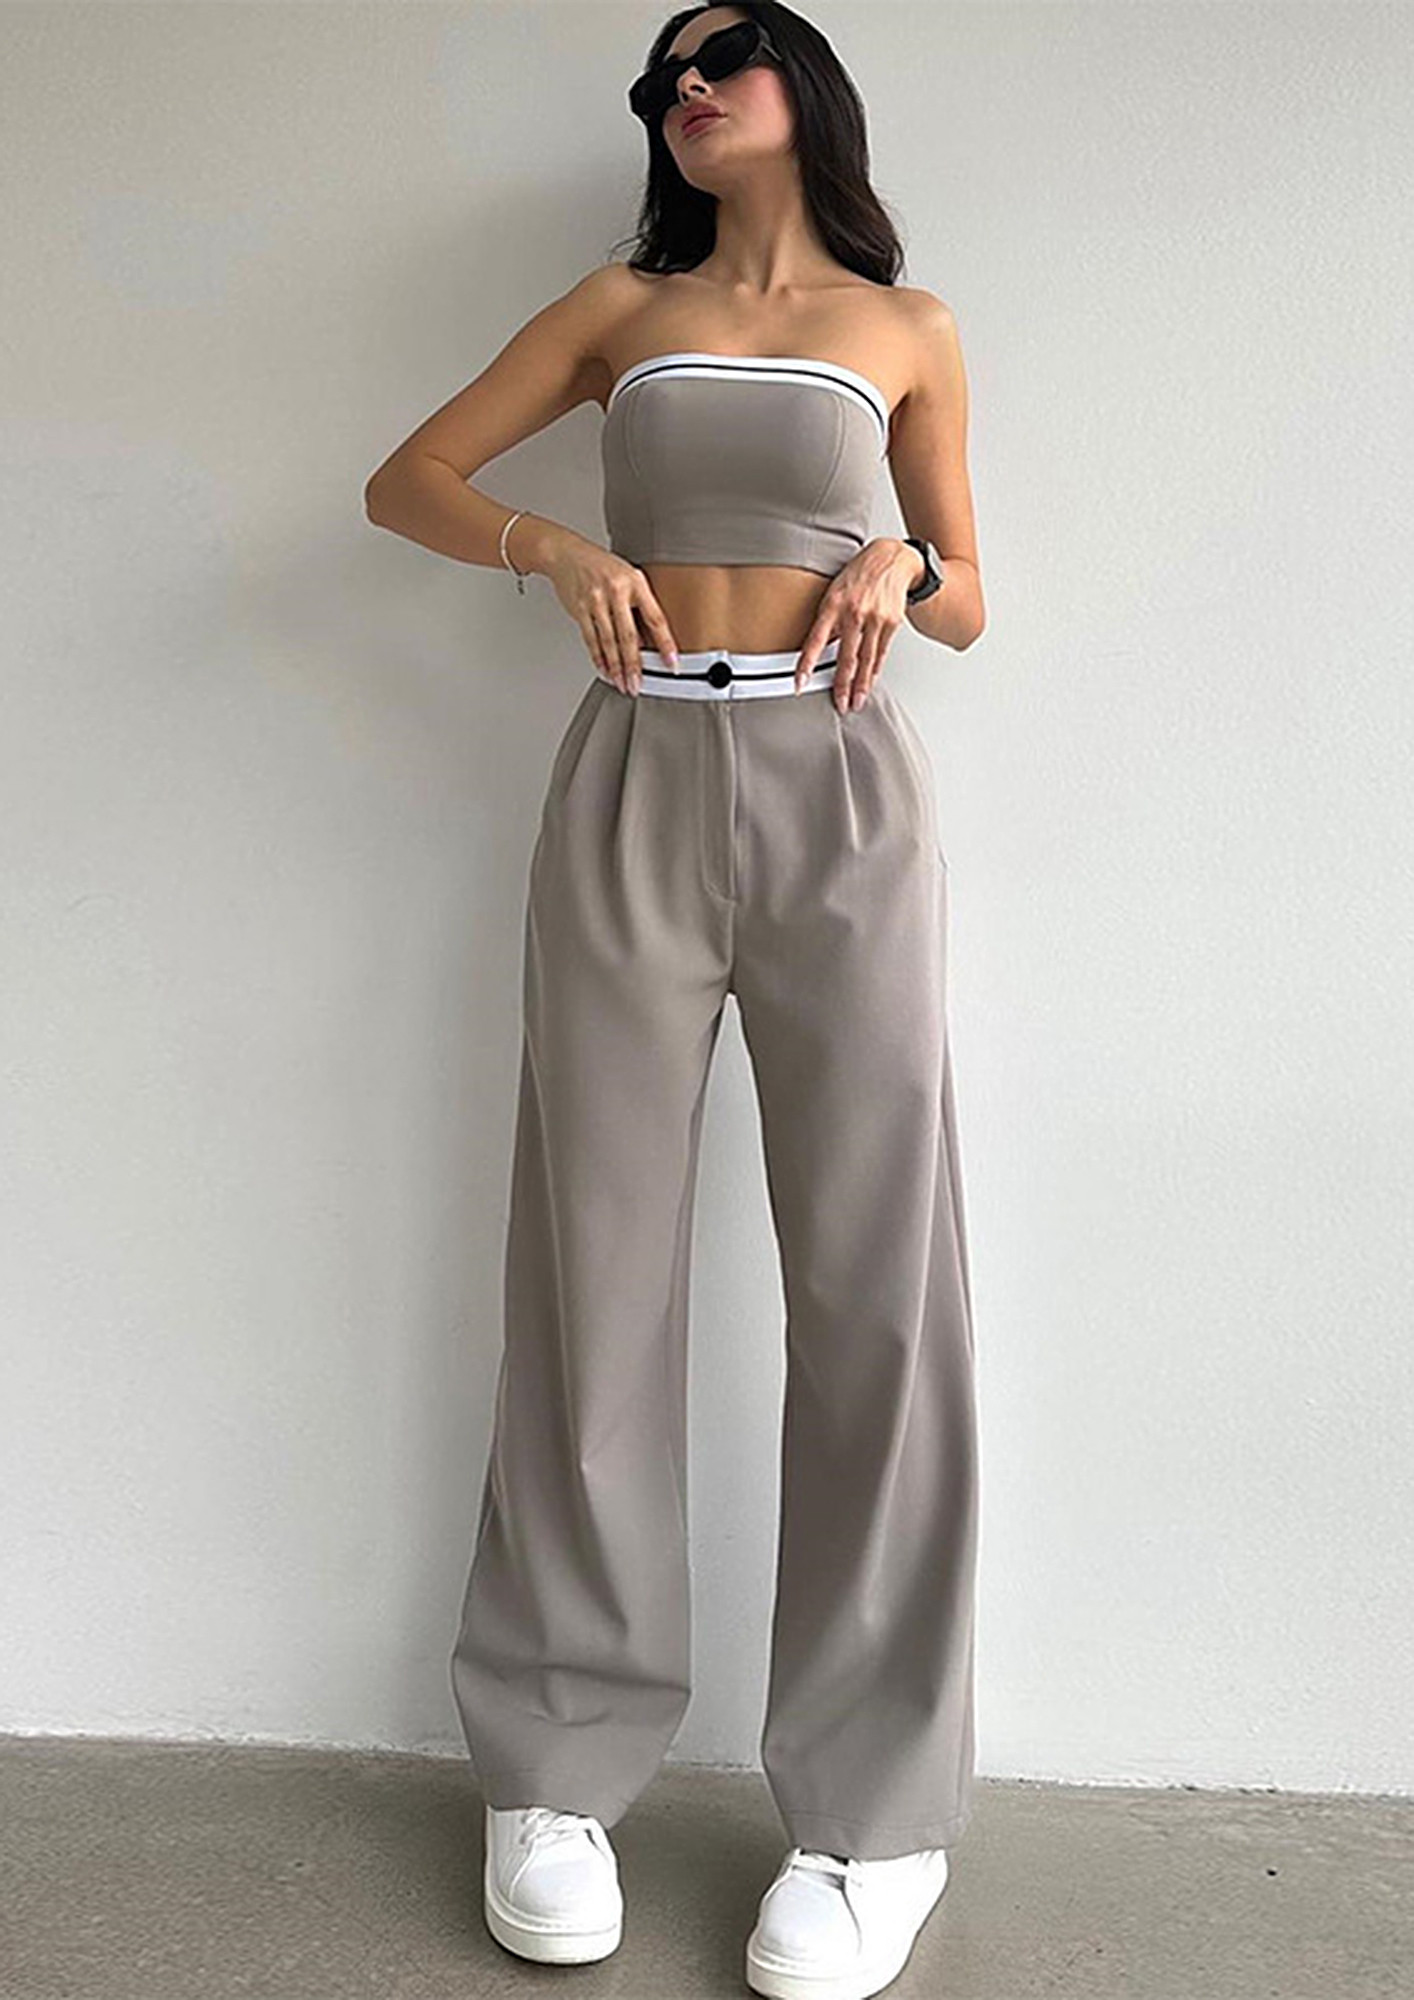 72 Top Wide Leg Trousers Outfit Classy Hacks To Try Out | Wide leg trousers  outfit, Wide leg pants outfit, Wide leg trousers outfit classy